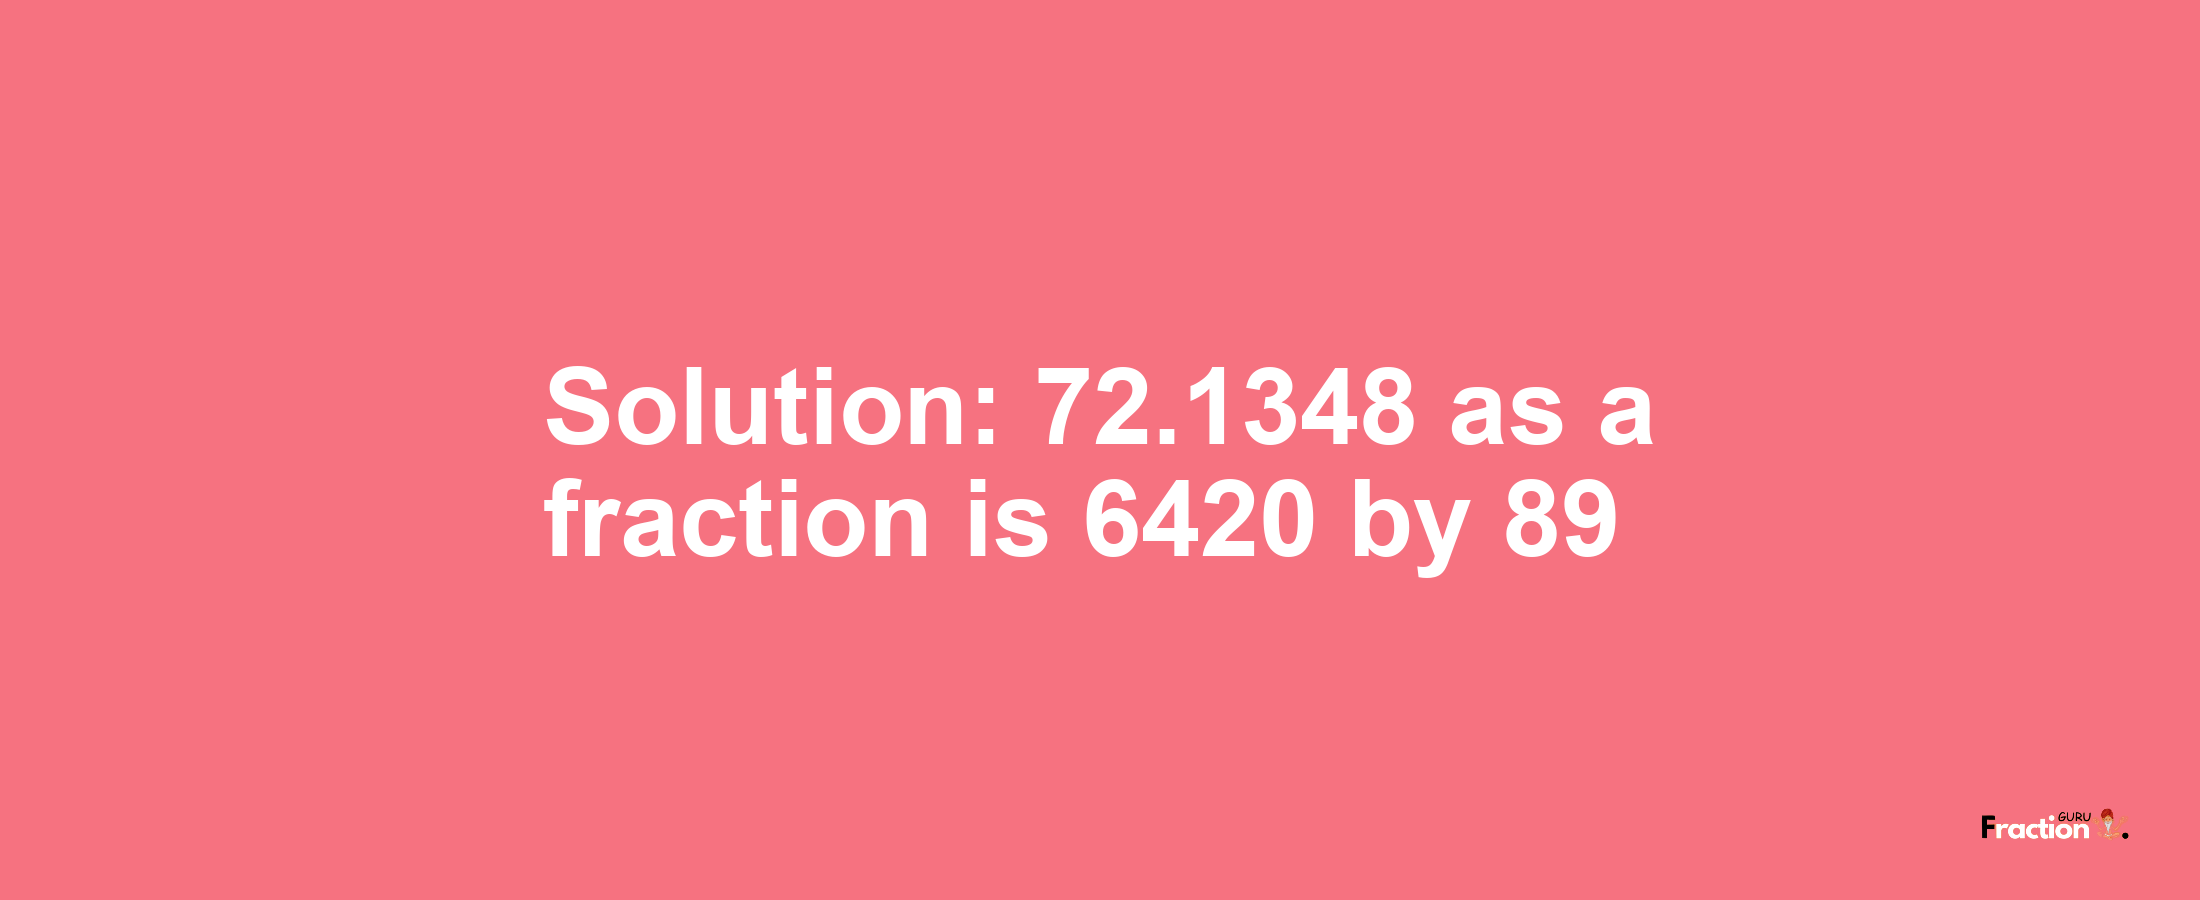 Solution:72.1348 as a fraction is 6420/89